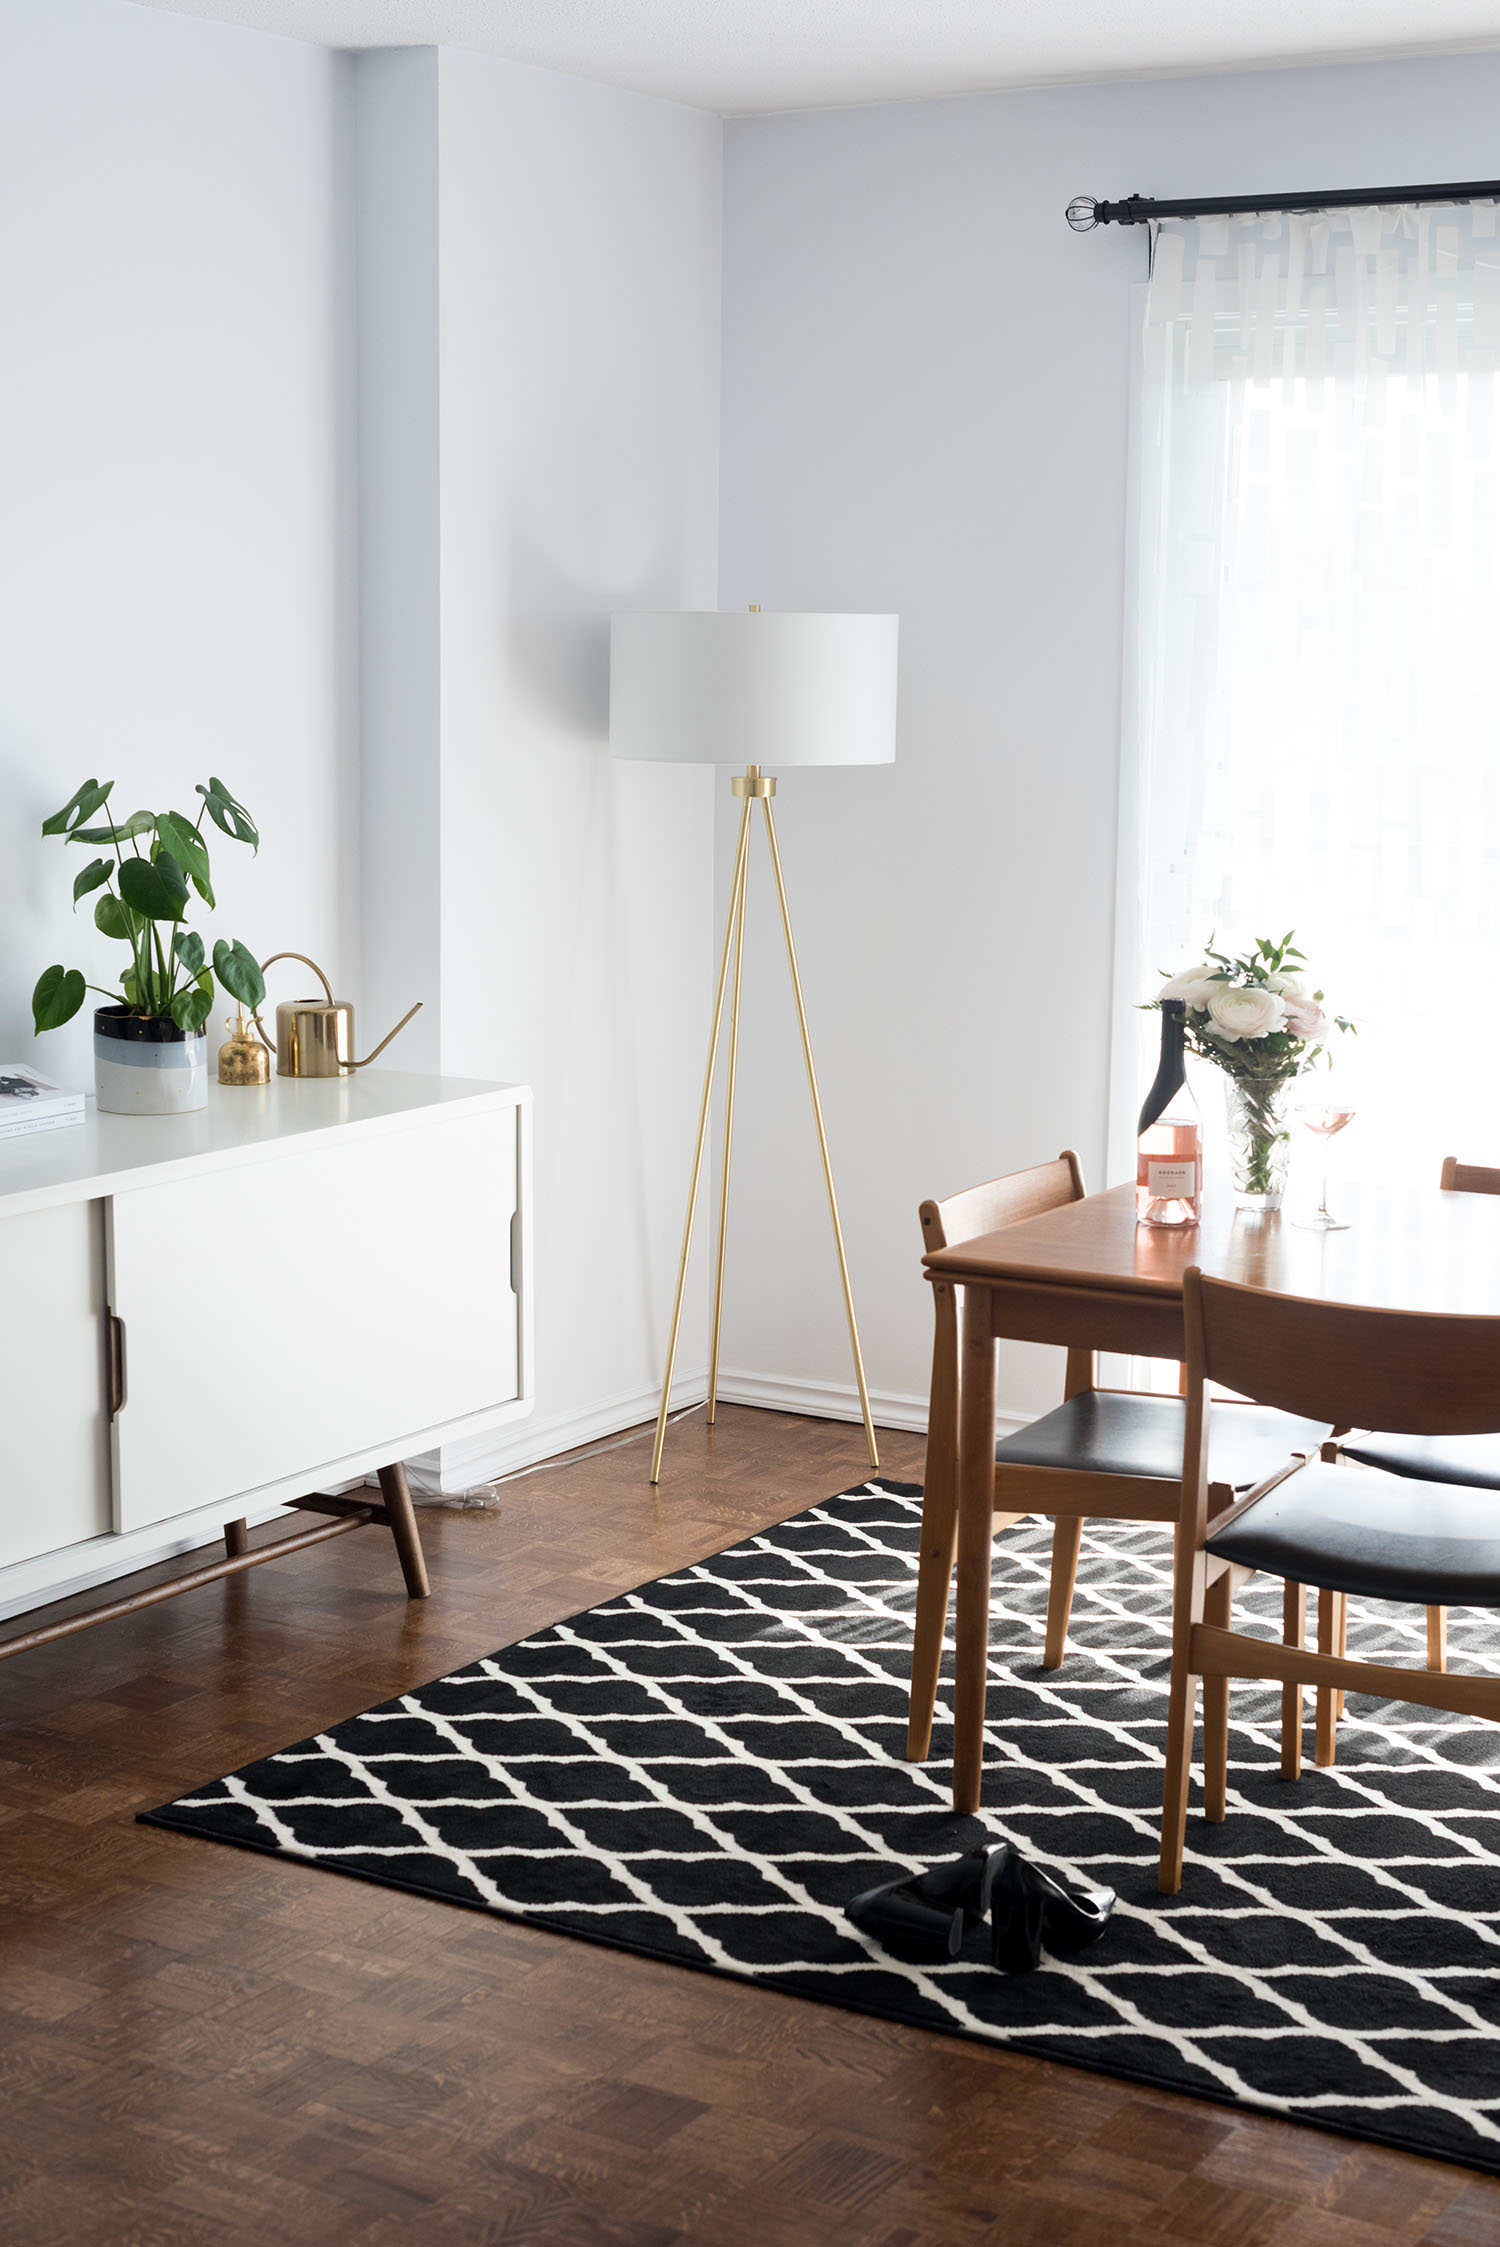 A Structube buffet and vintage dining table in the living room of Winnipeg lifestyle blogger Cee Fardoe of Coco & Vera